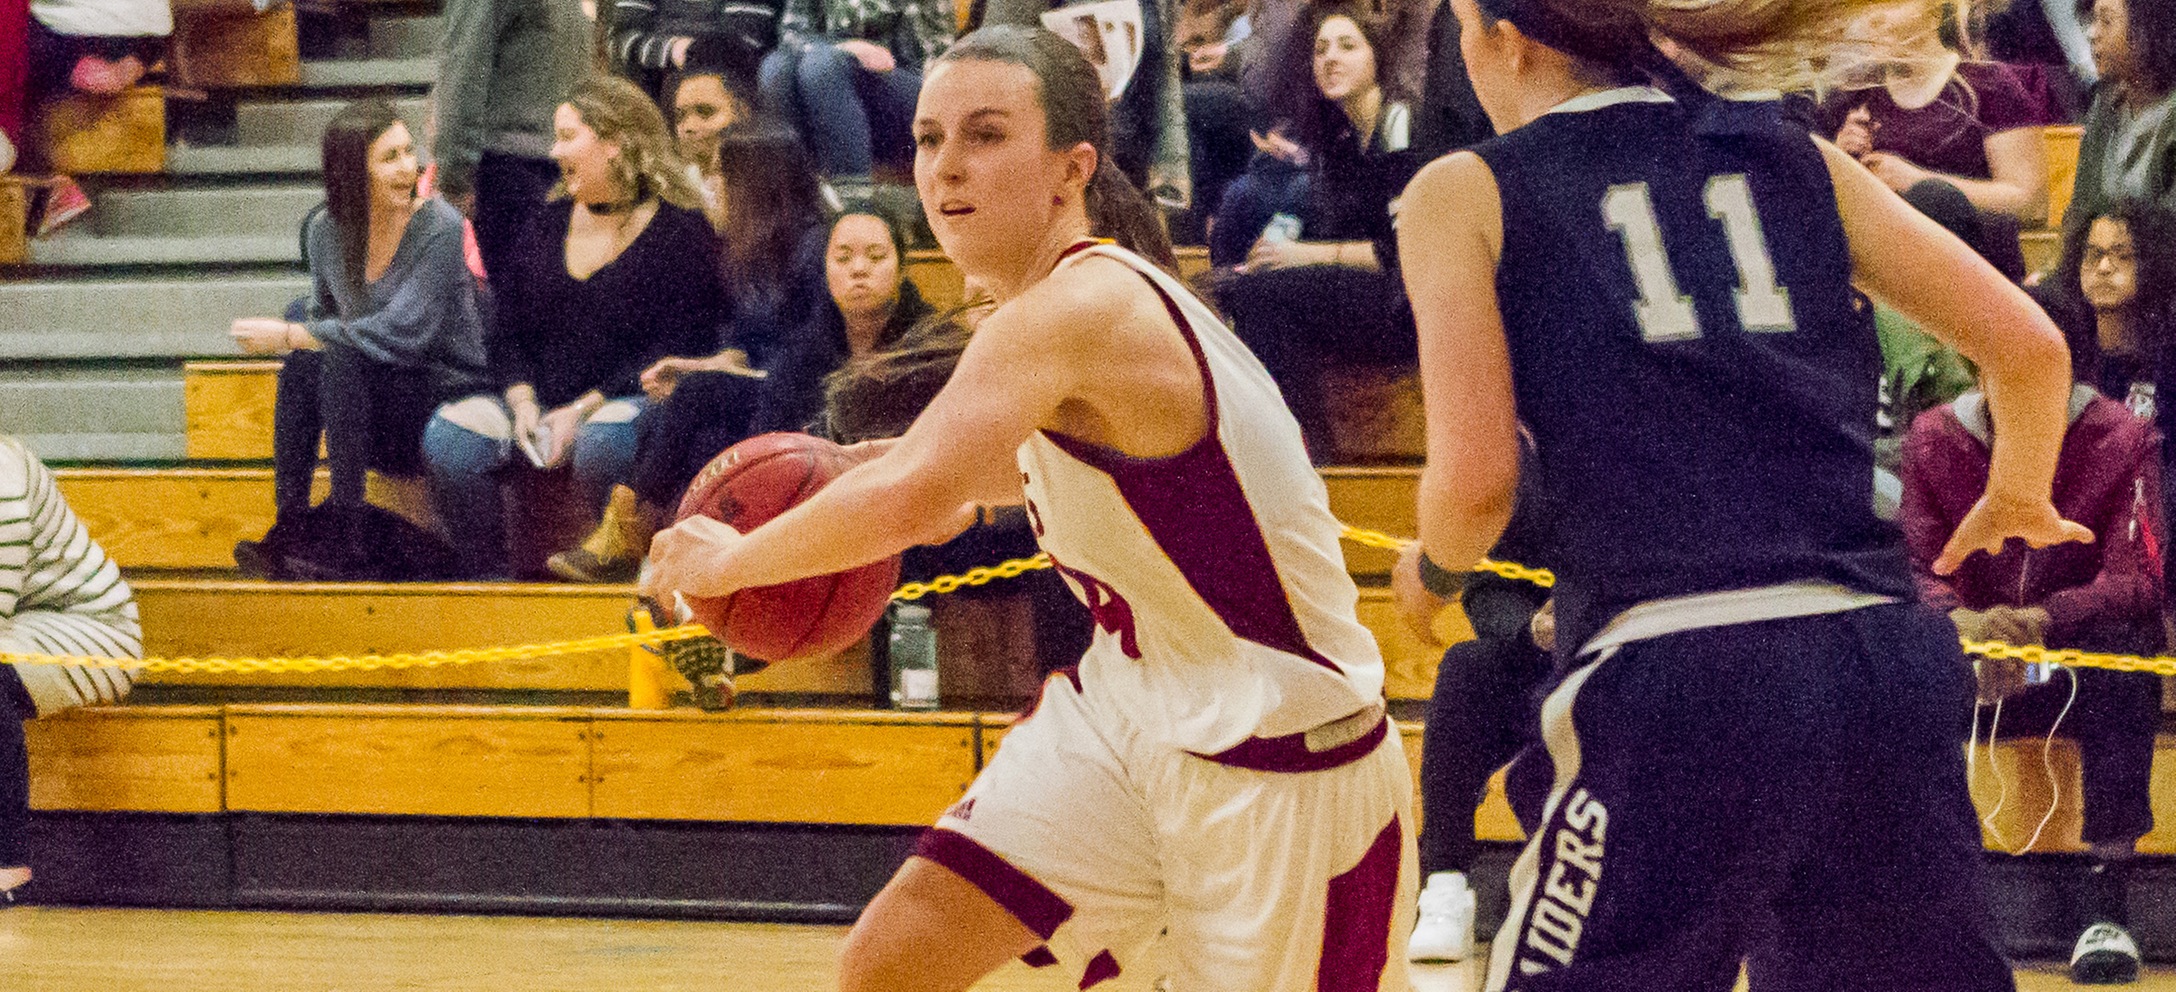 Regis Women’s Basketball Succumbs to Colby Comeback